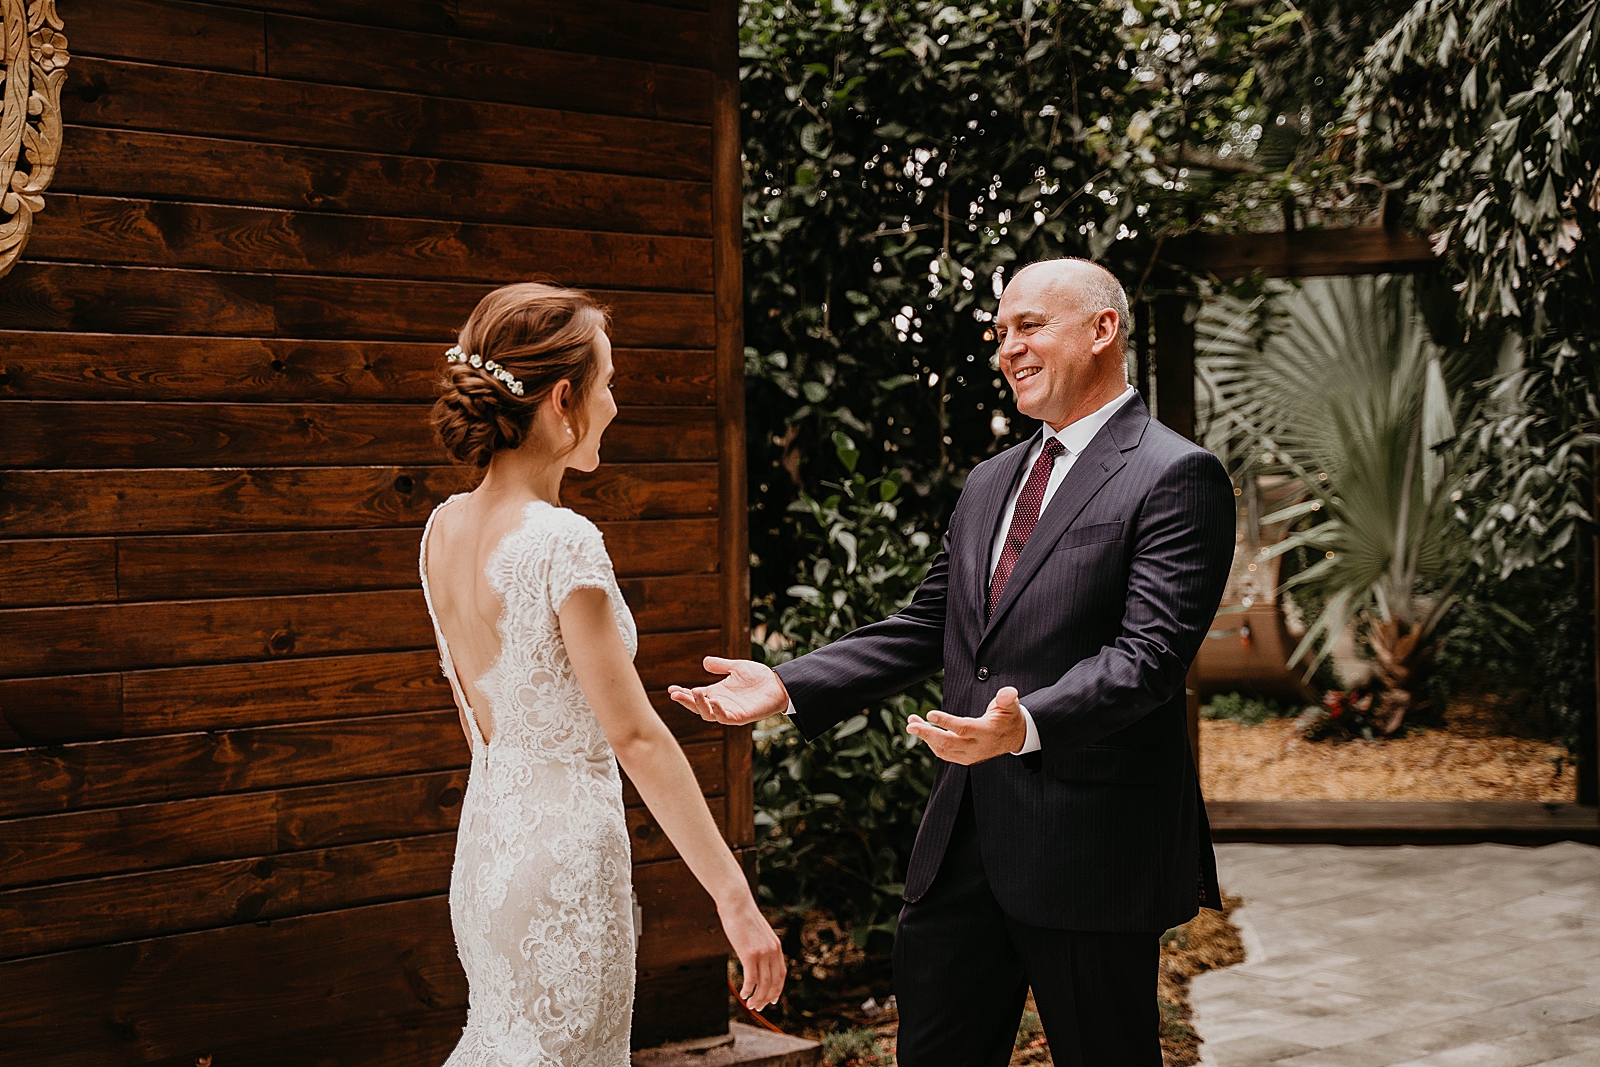 Father reacting to Bride in wedding dress Living Sculptures Sanctuary Wedding Photography captured by South Florida Wedding Photographer Krystal Capone Photography 